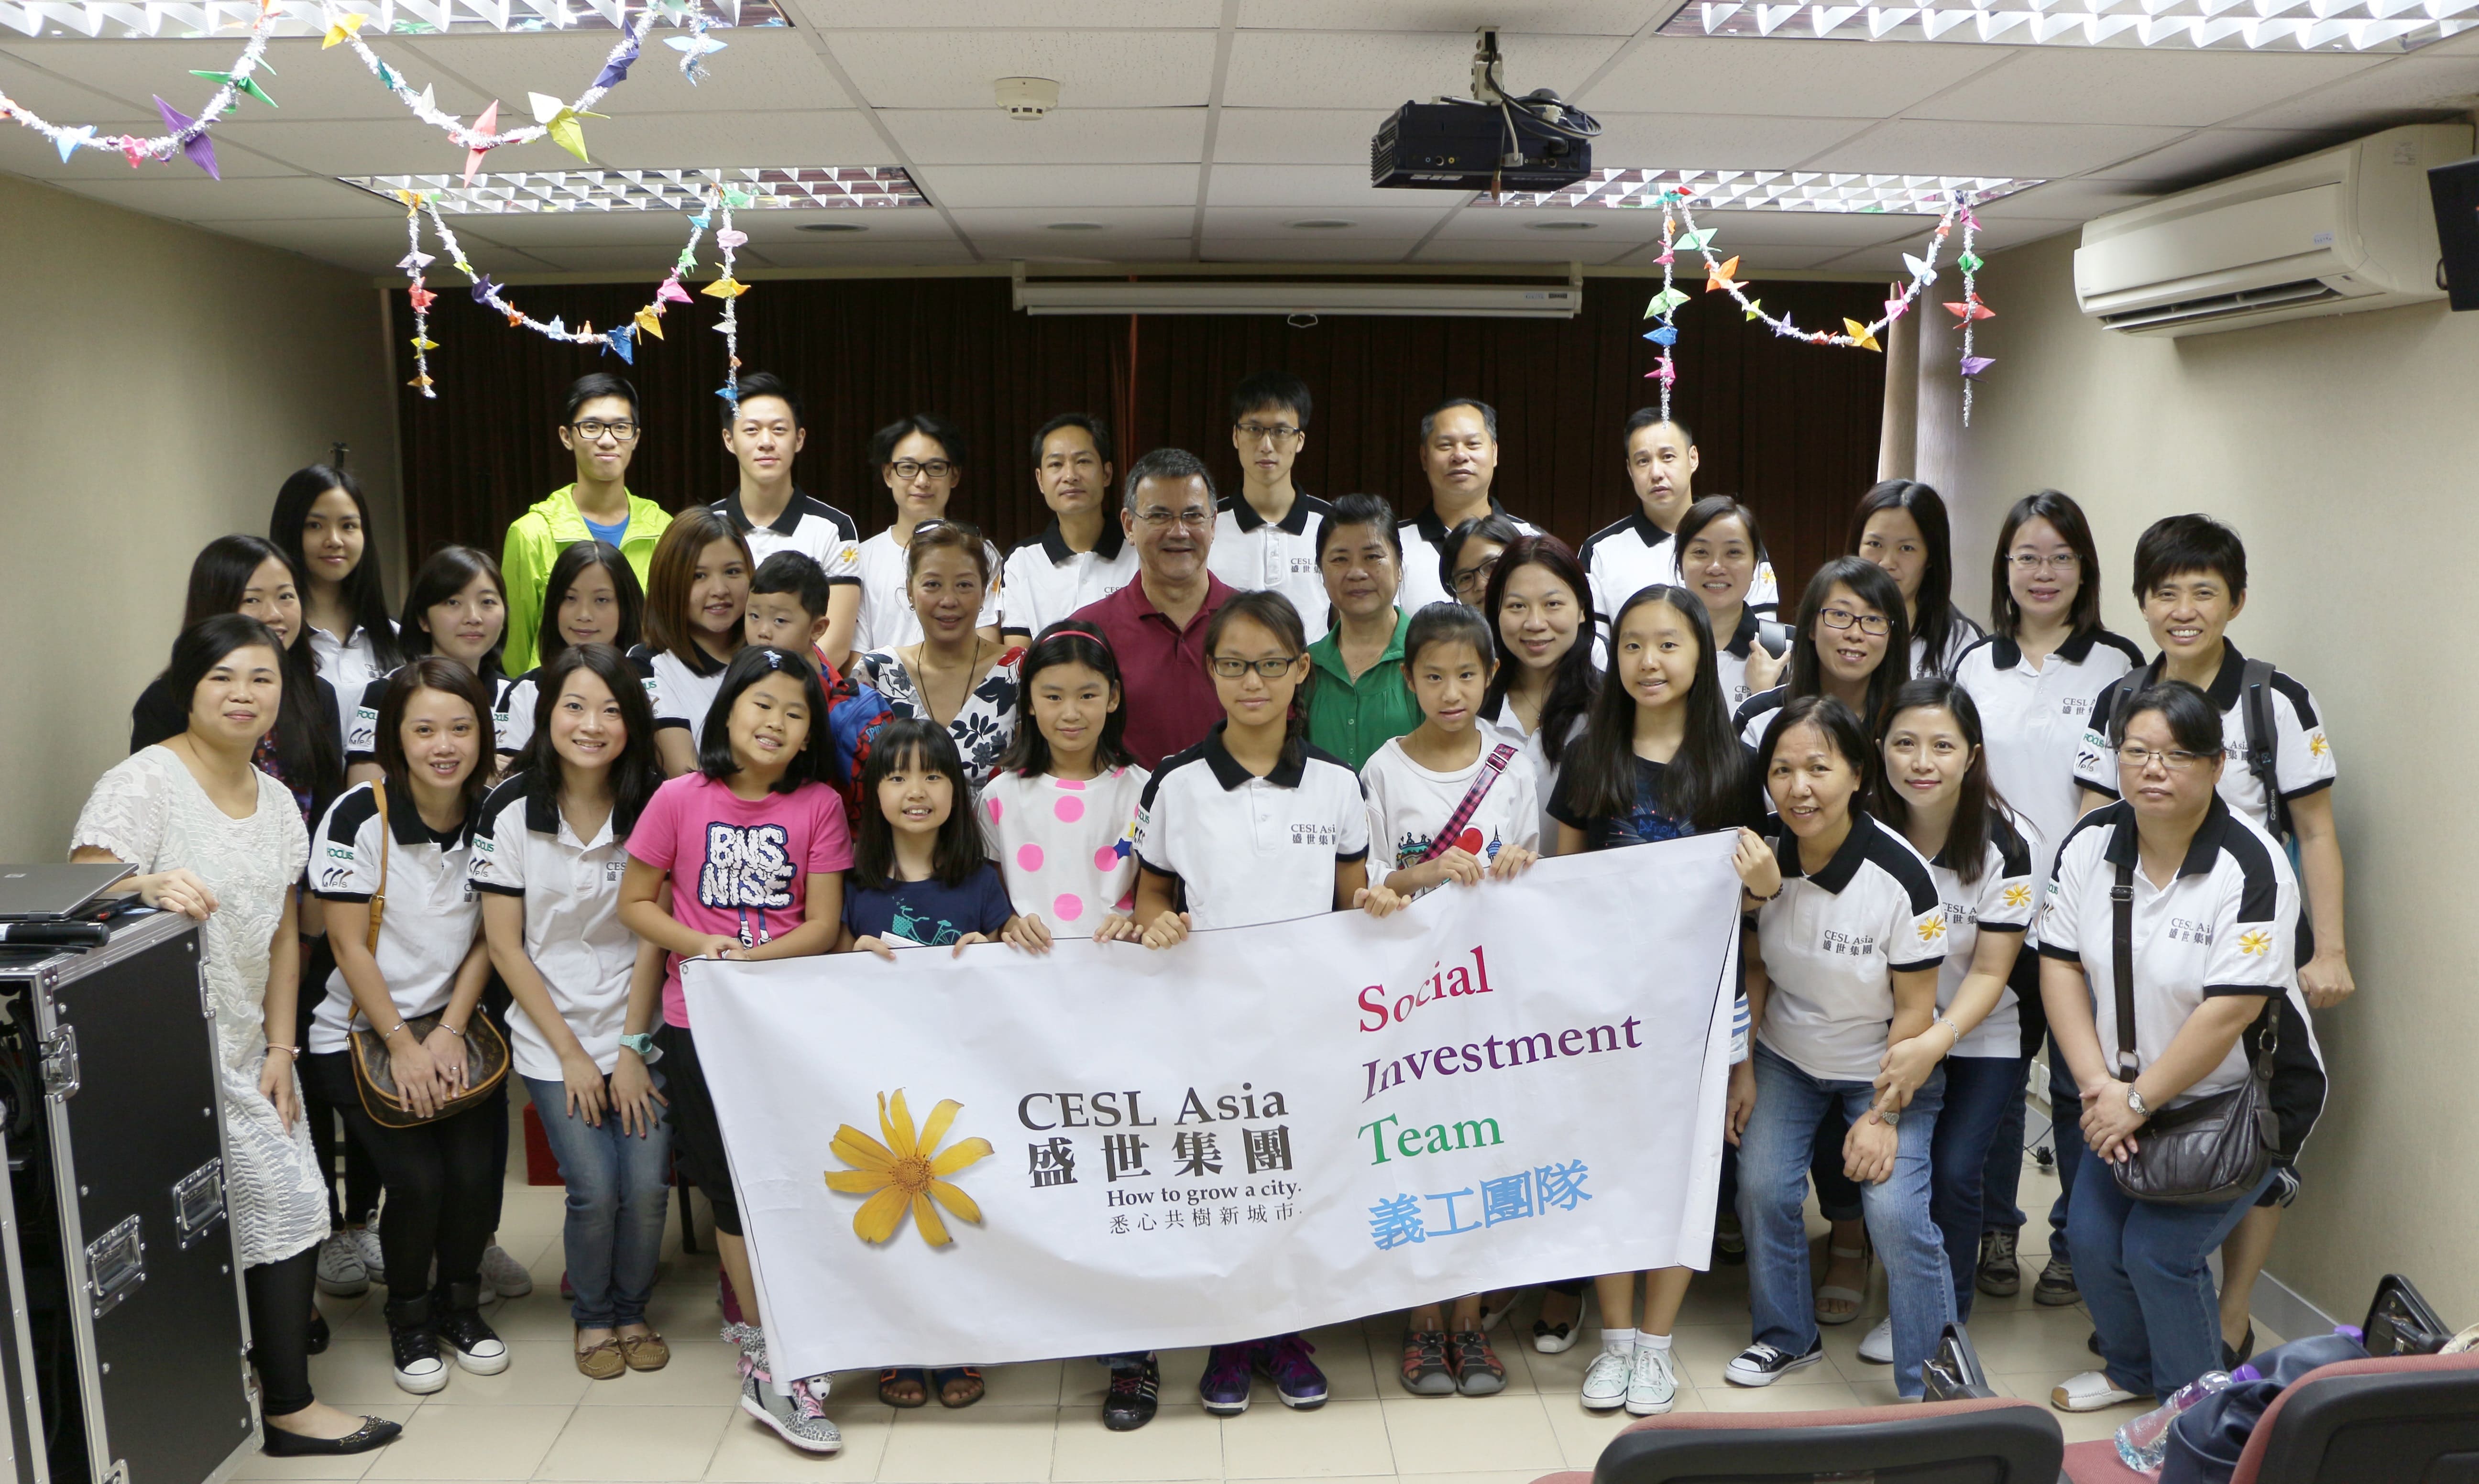 Volunteer Group from CESL Asia Visits “Peng On Tung” Tele-Assistance Service Users